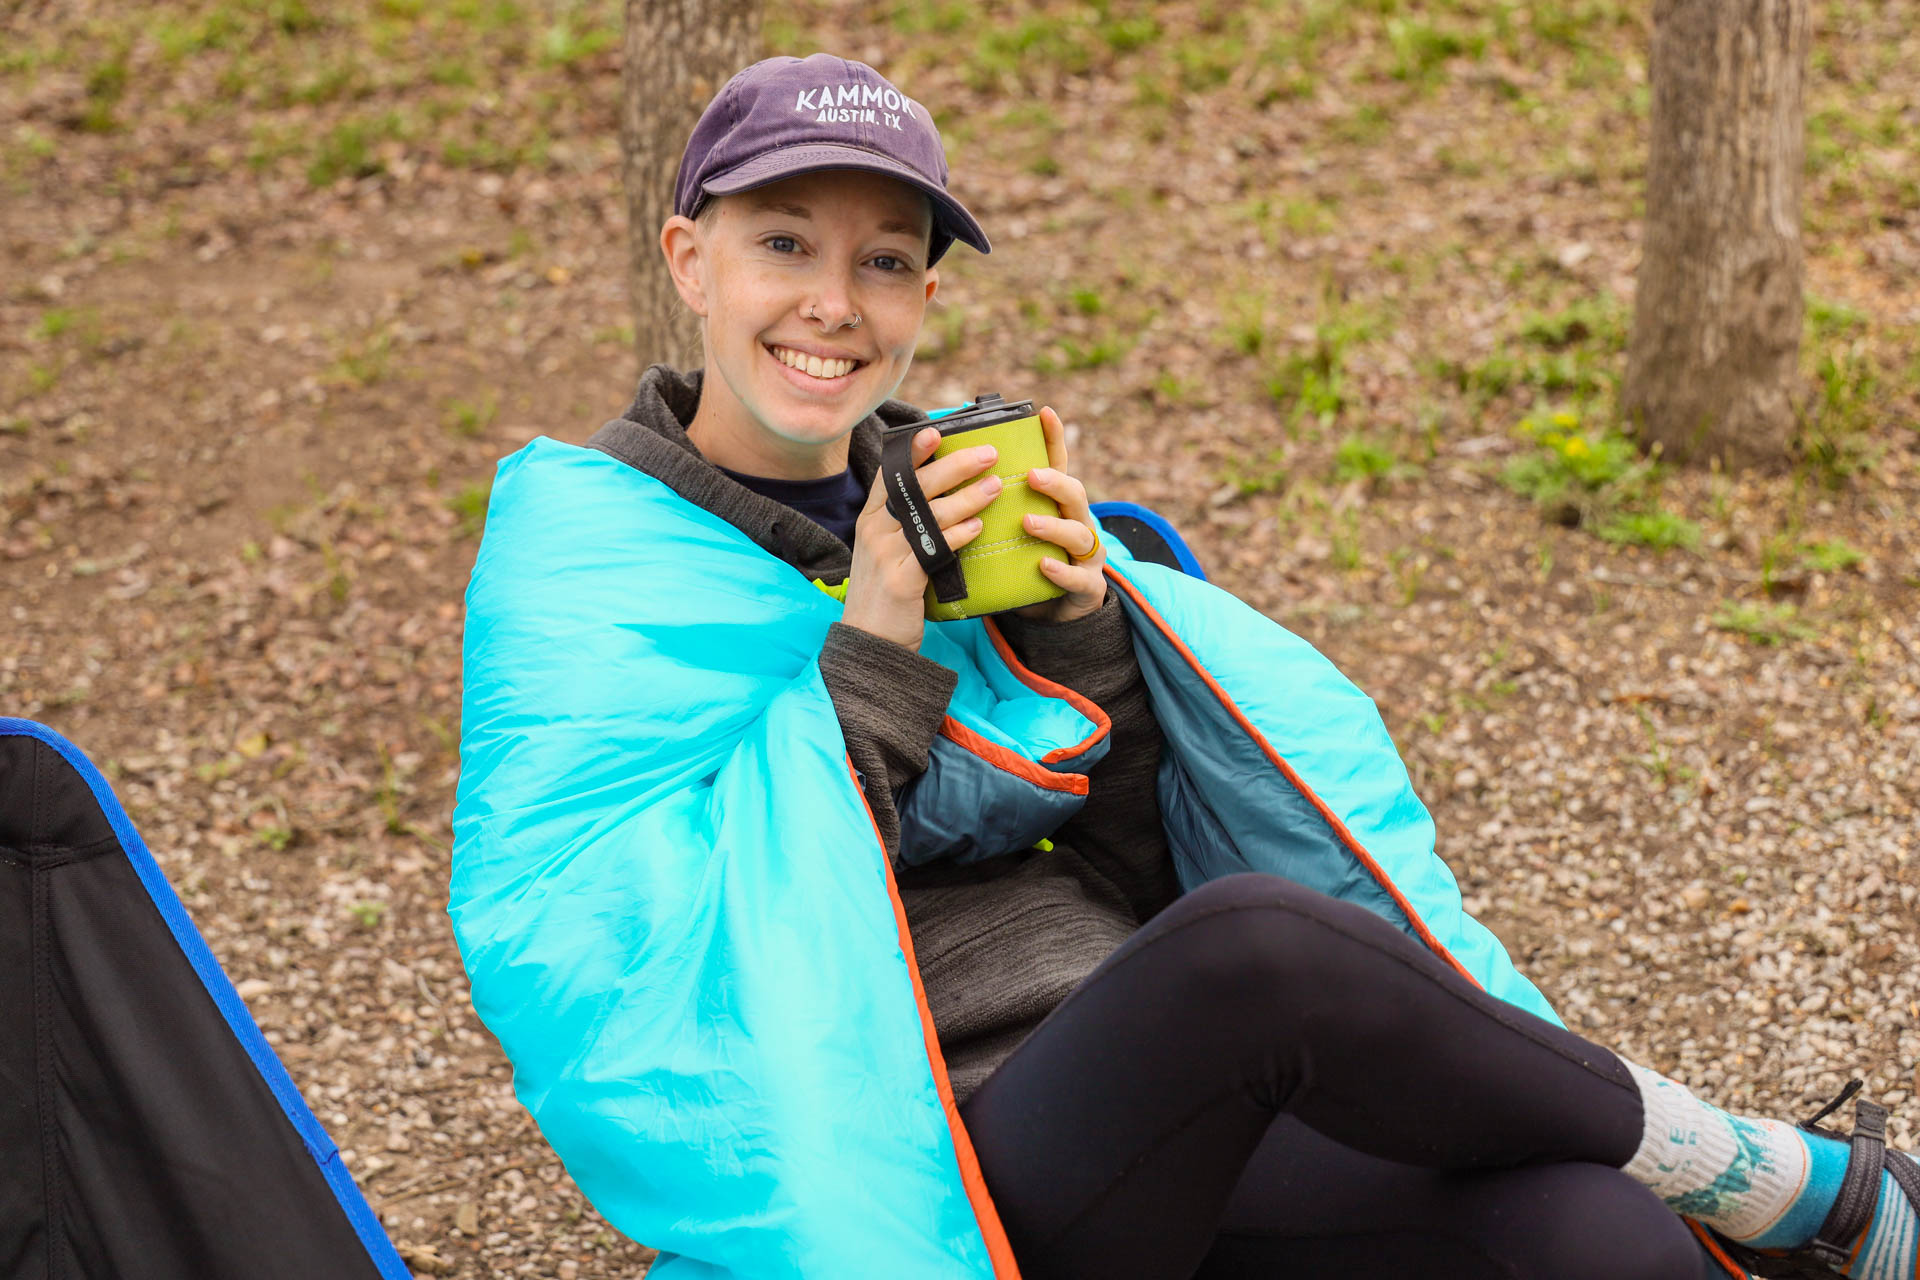 Using the UST Monarch sleeping bag's detachable wings as a shoulder wrap at camp.